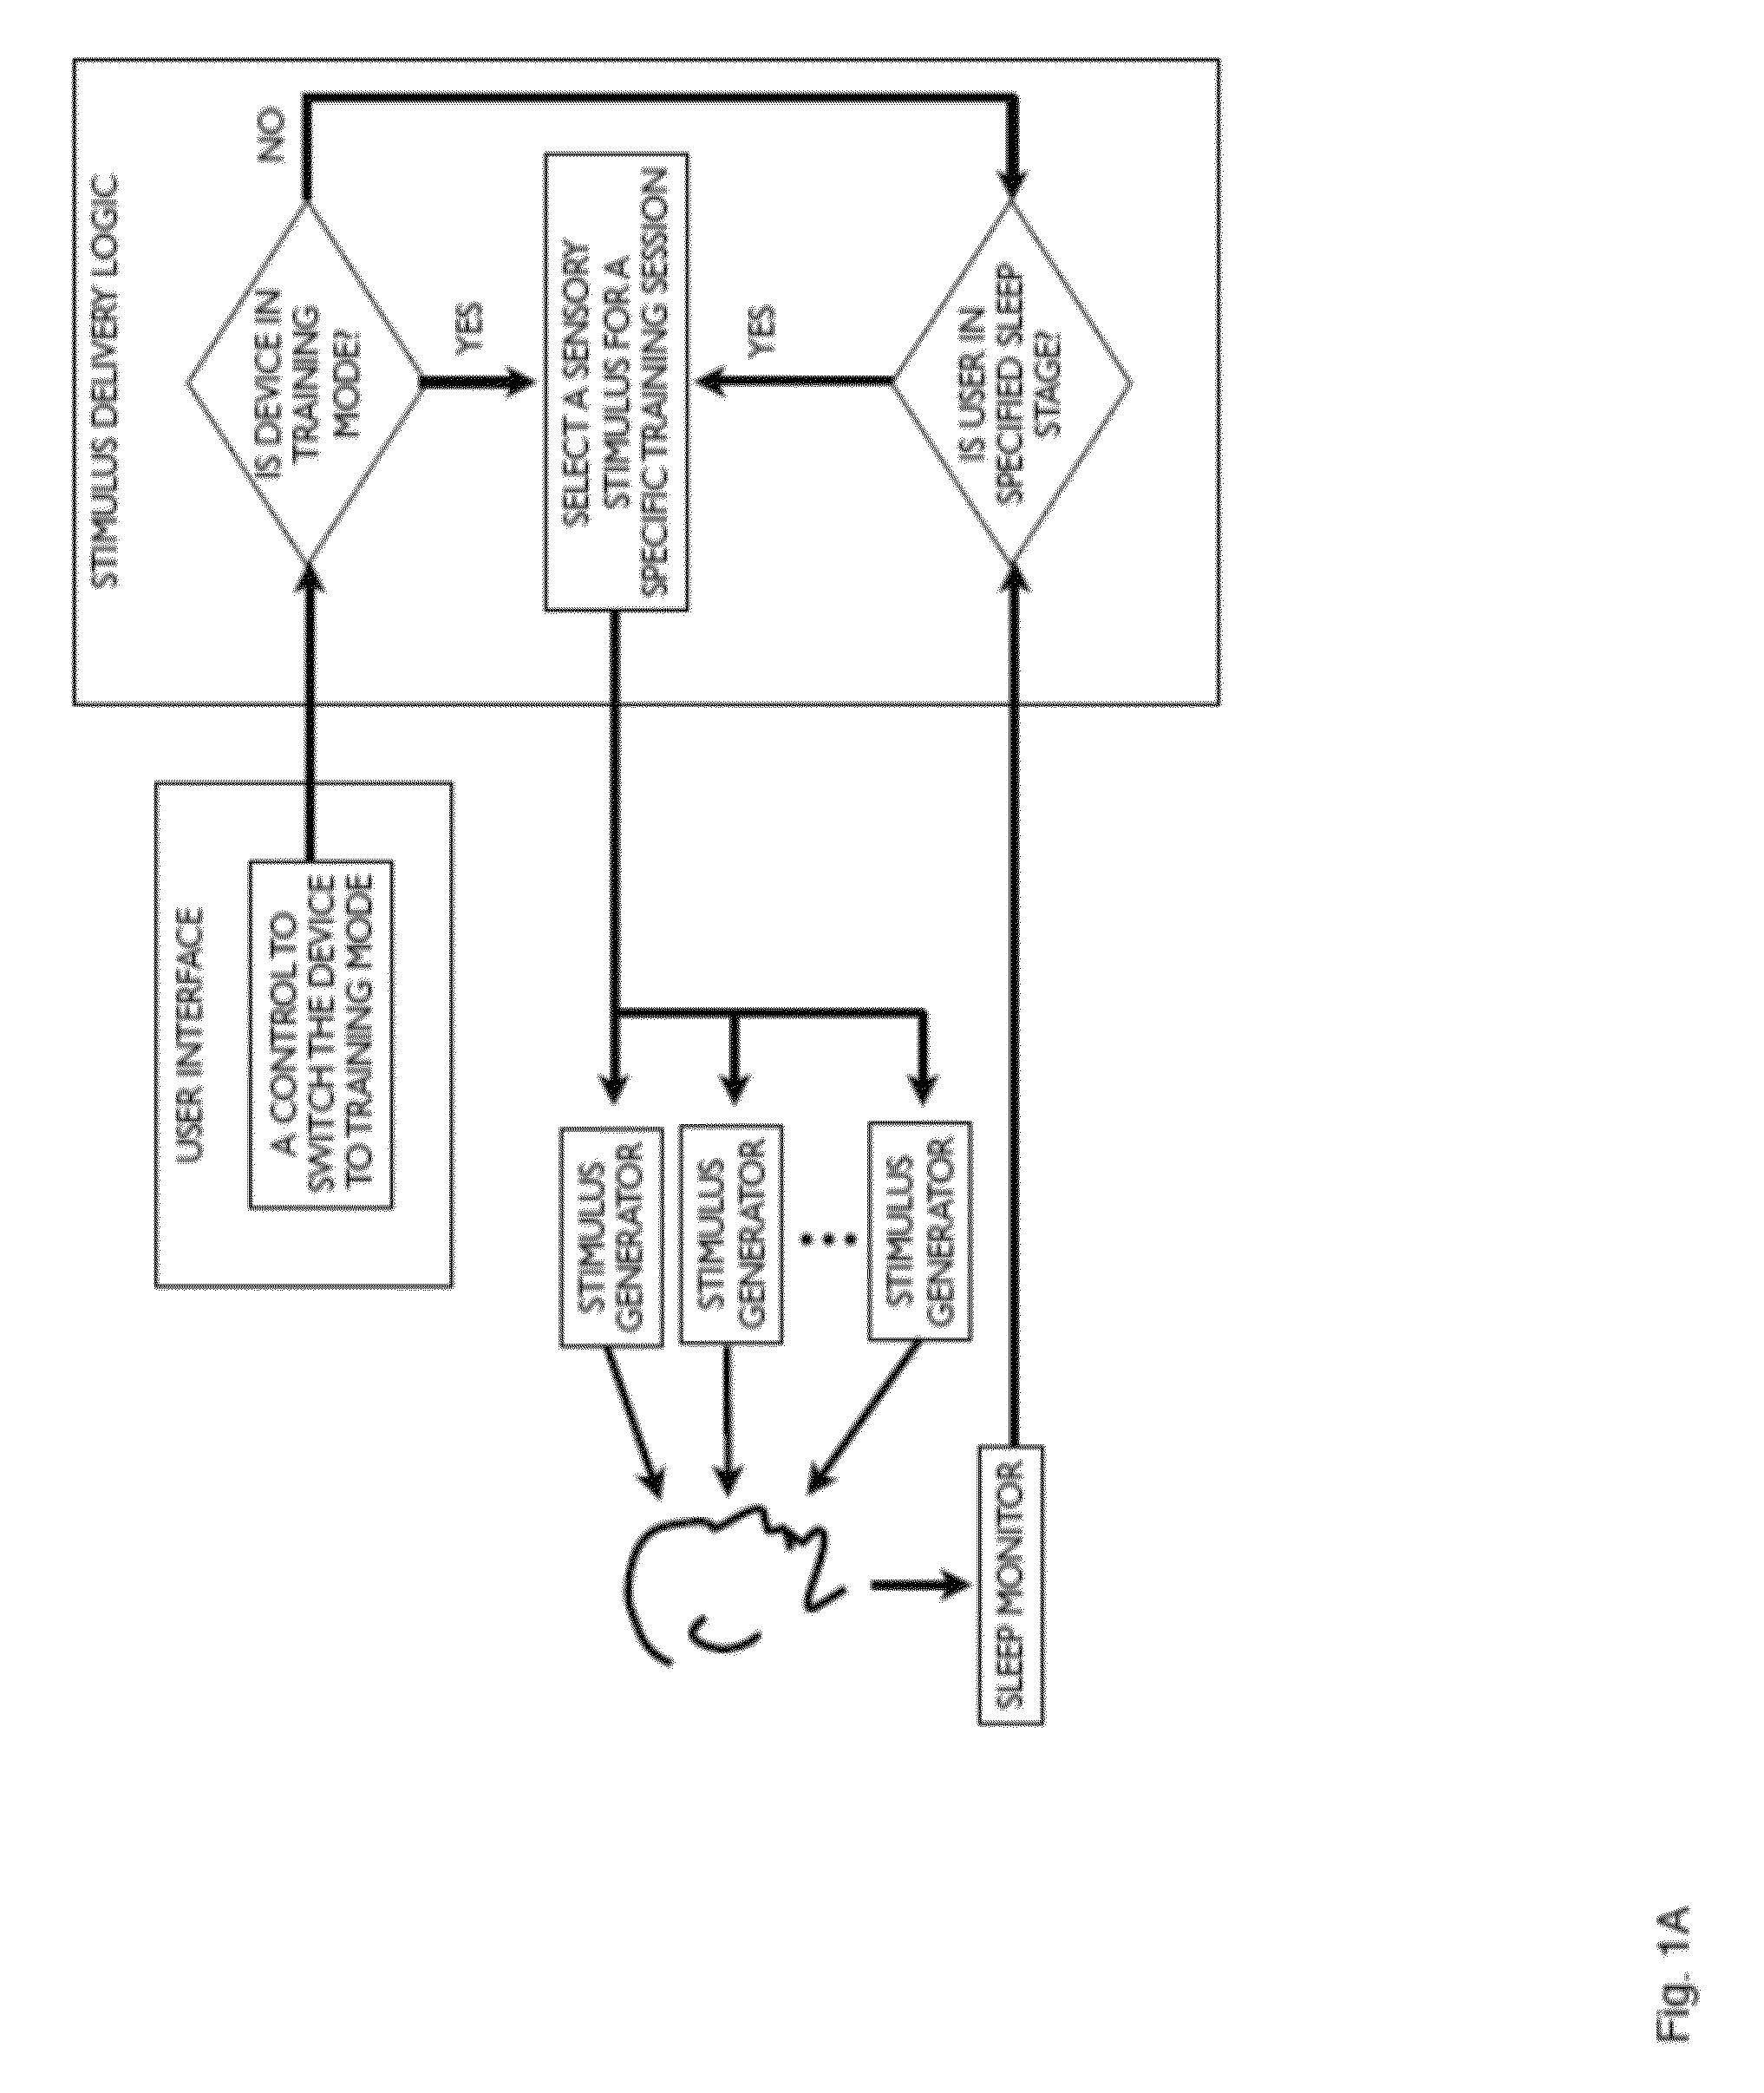 Apparatus, system, and method for modulating consolidation of memory during sleep